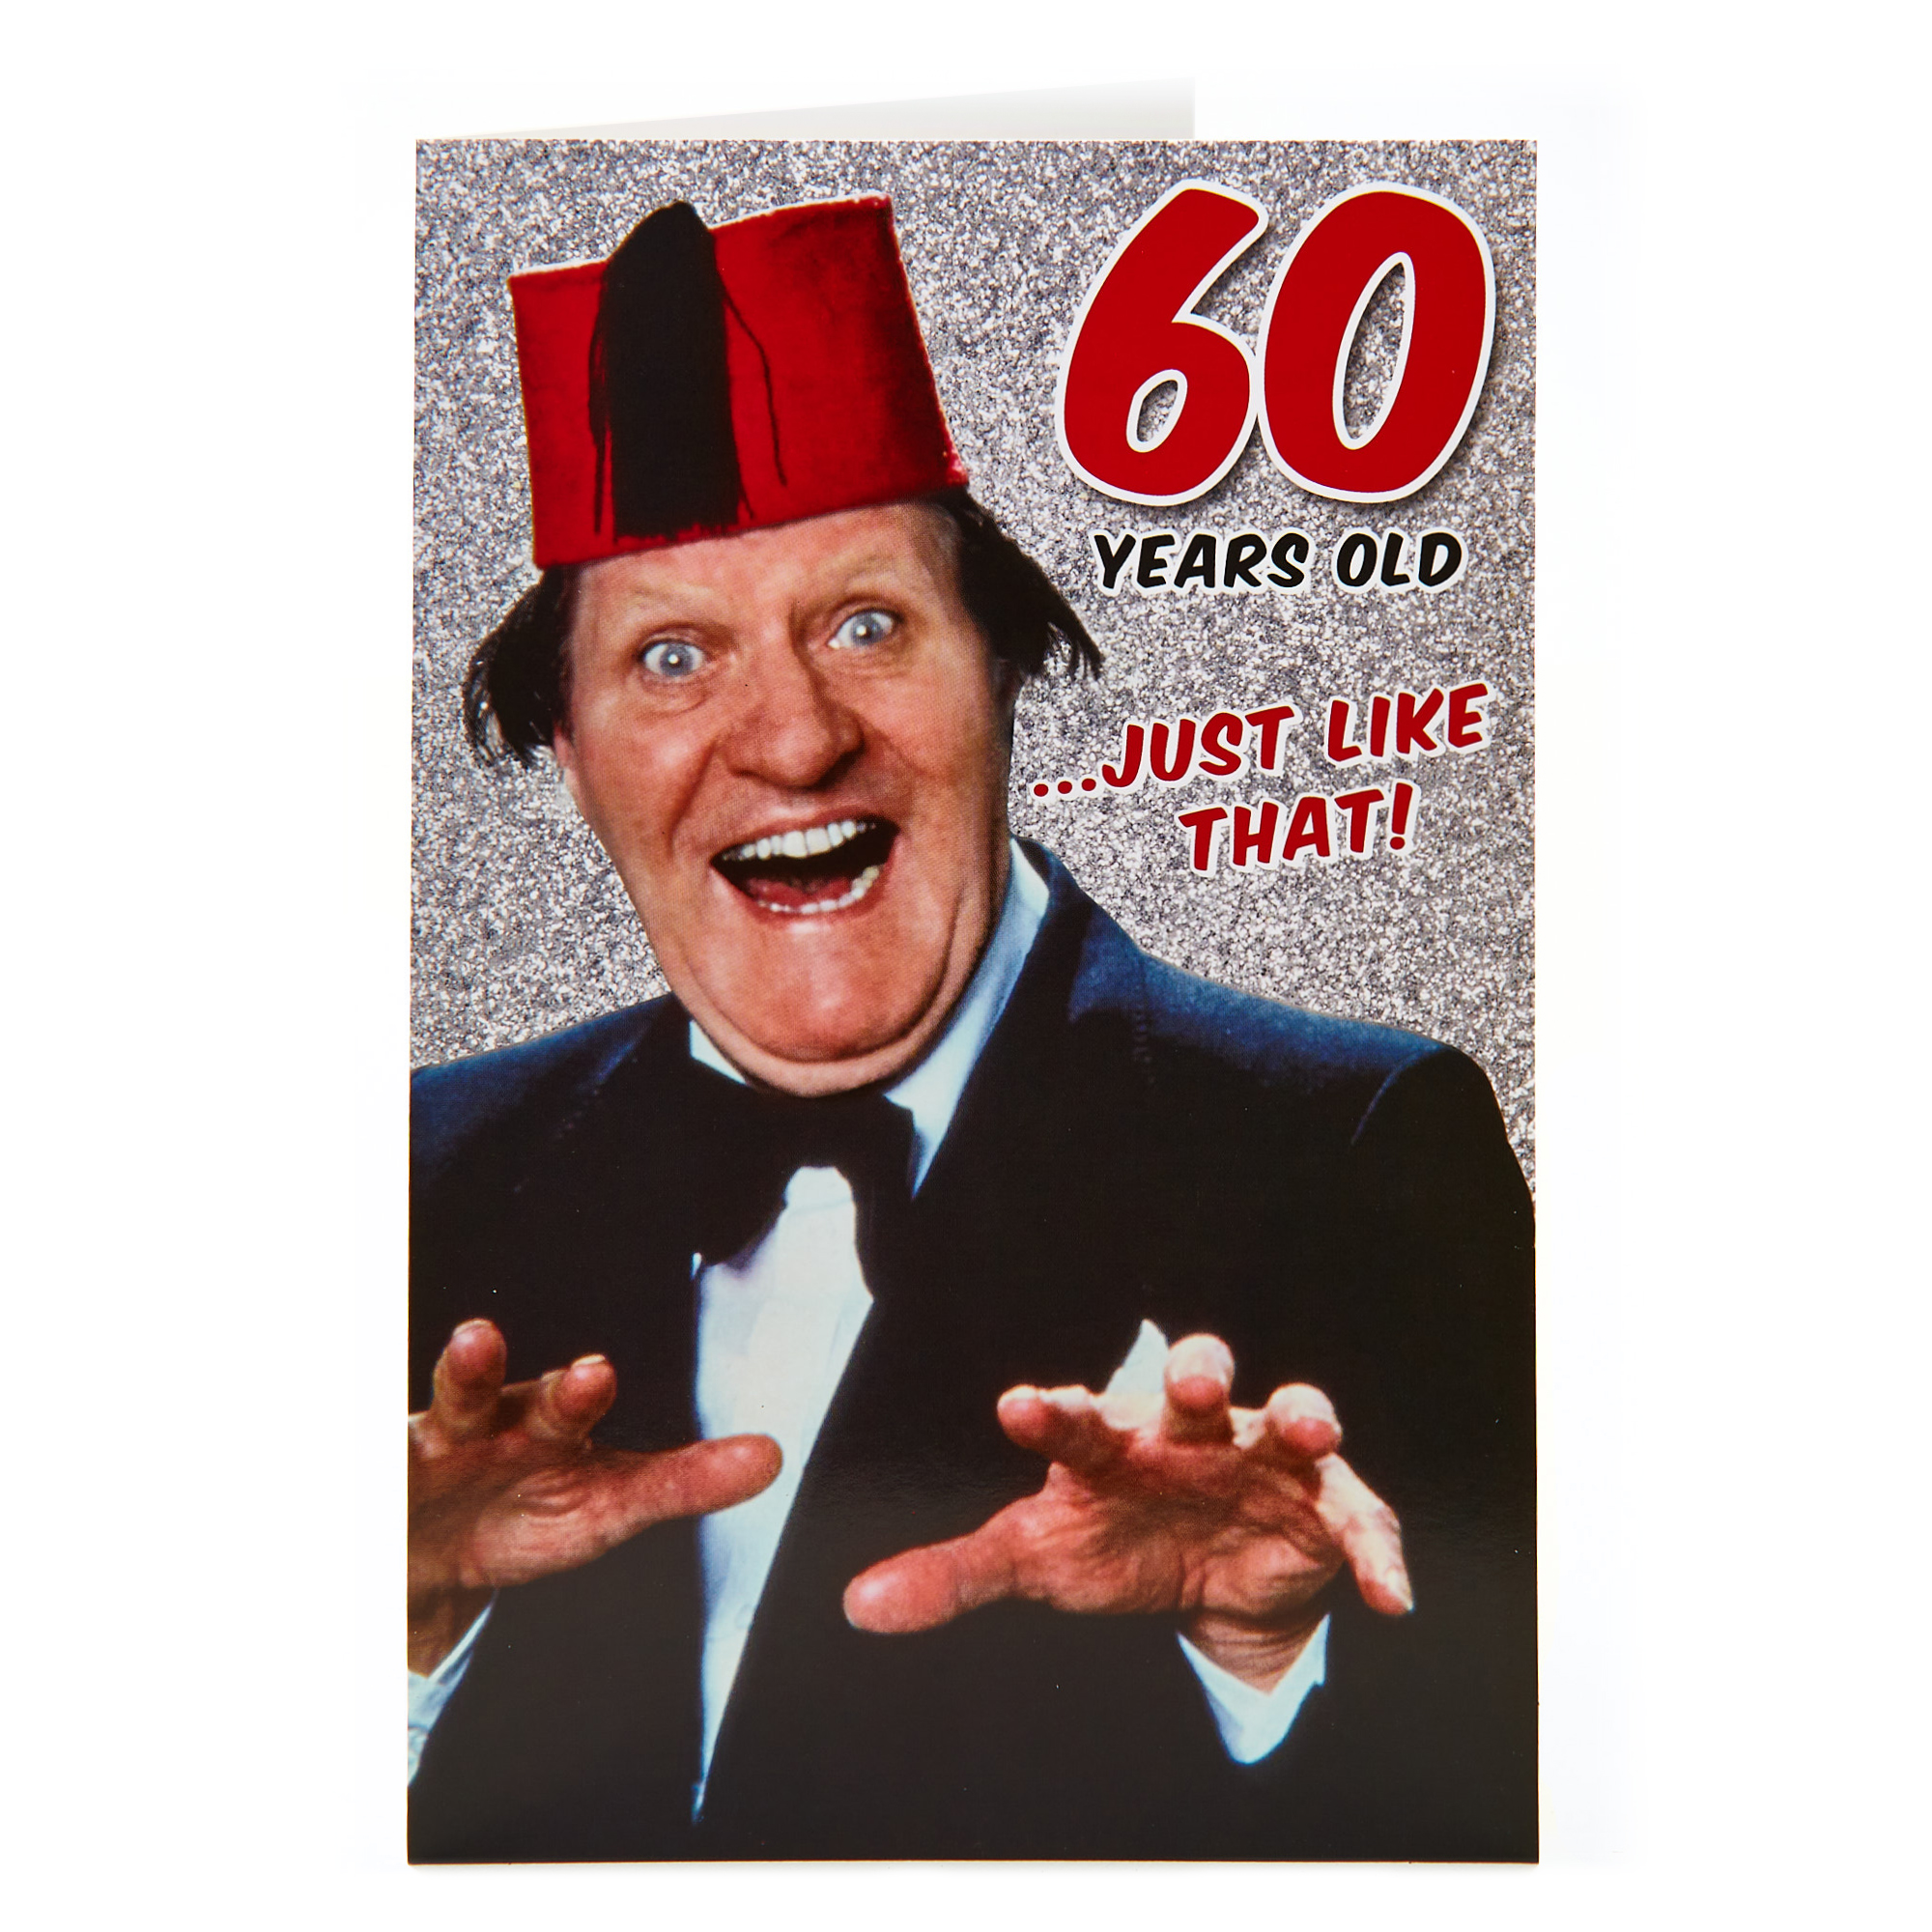 Tommy Cooper 60th Birthday Card